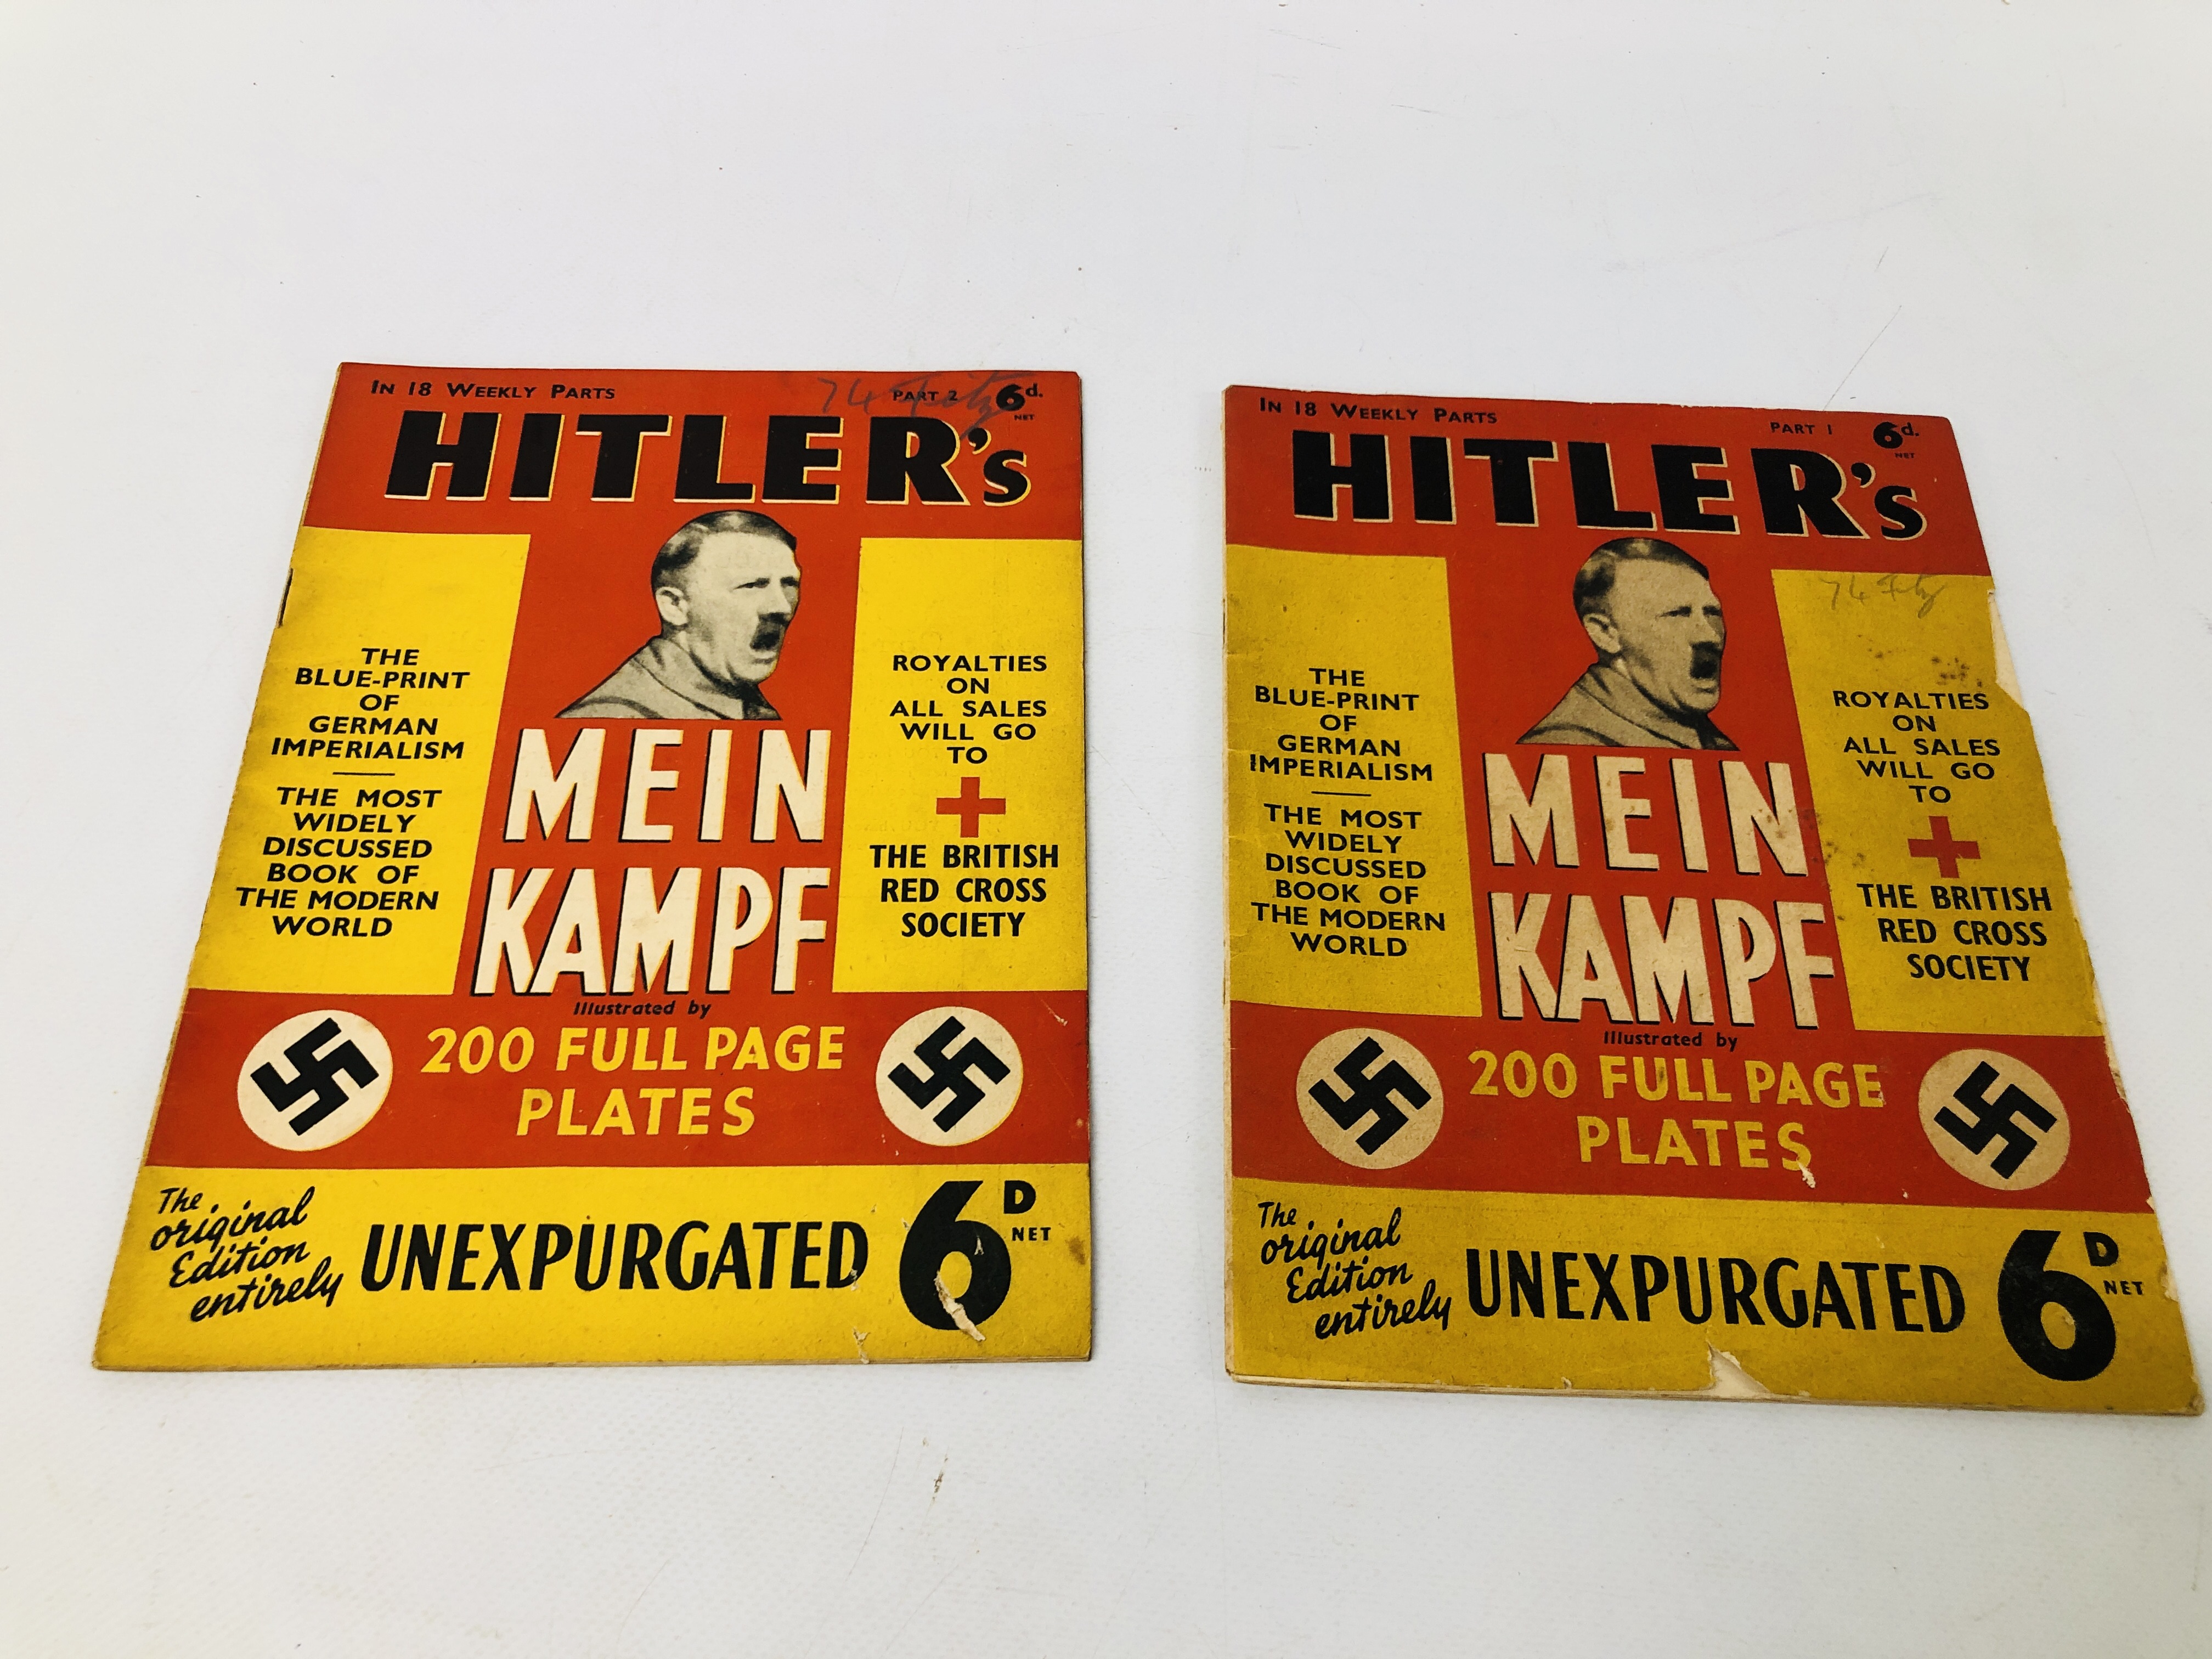 A FULL SET OF 18 HITLERS MAGAZINES MEIN KAMPF. - Image 6 of 8